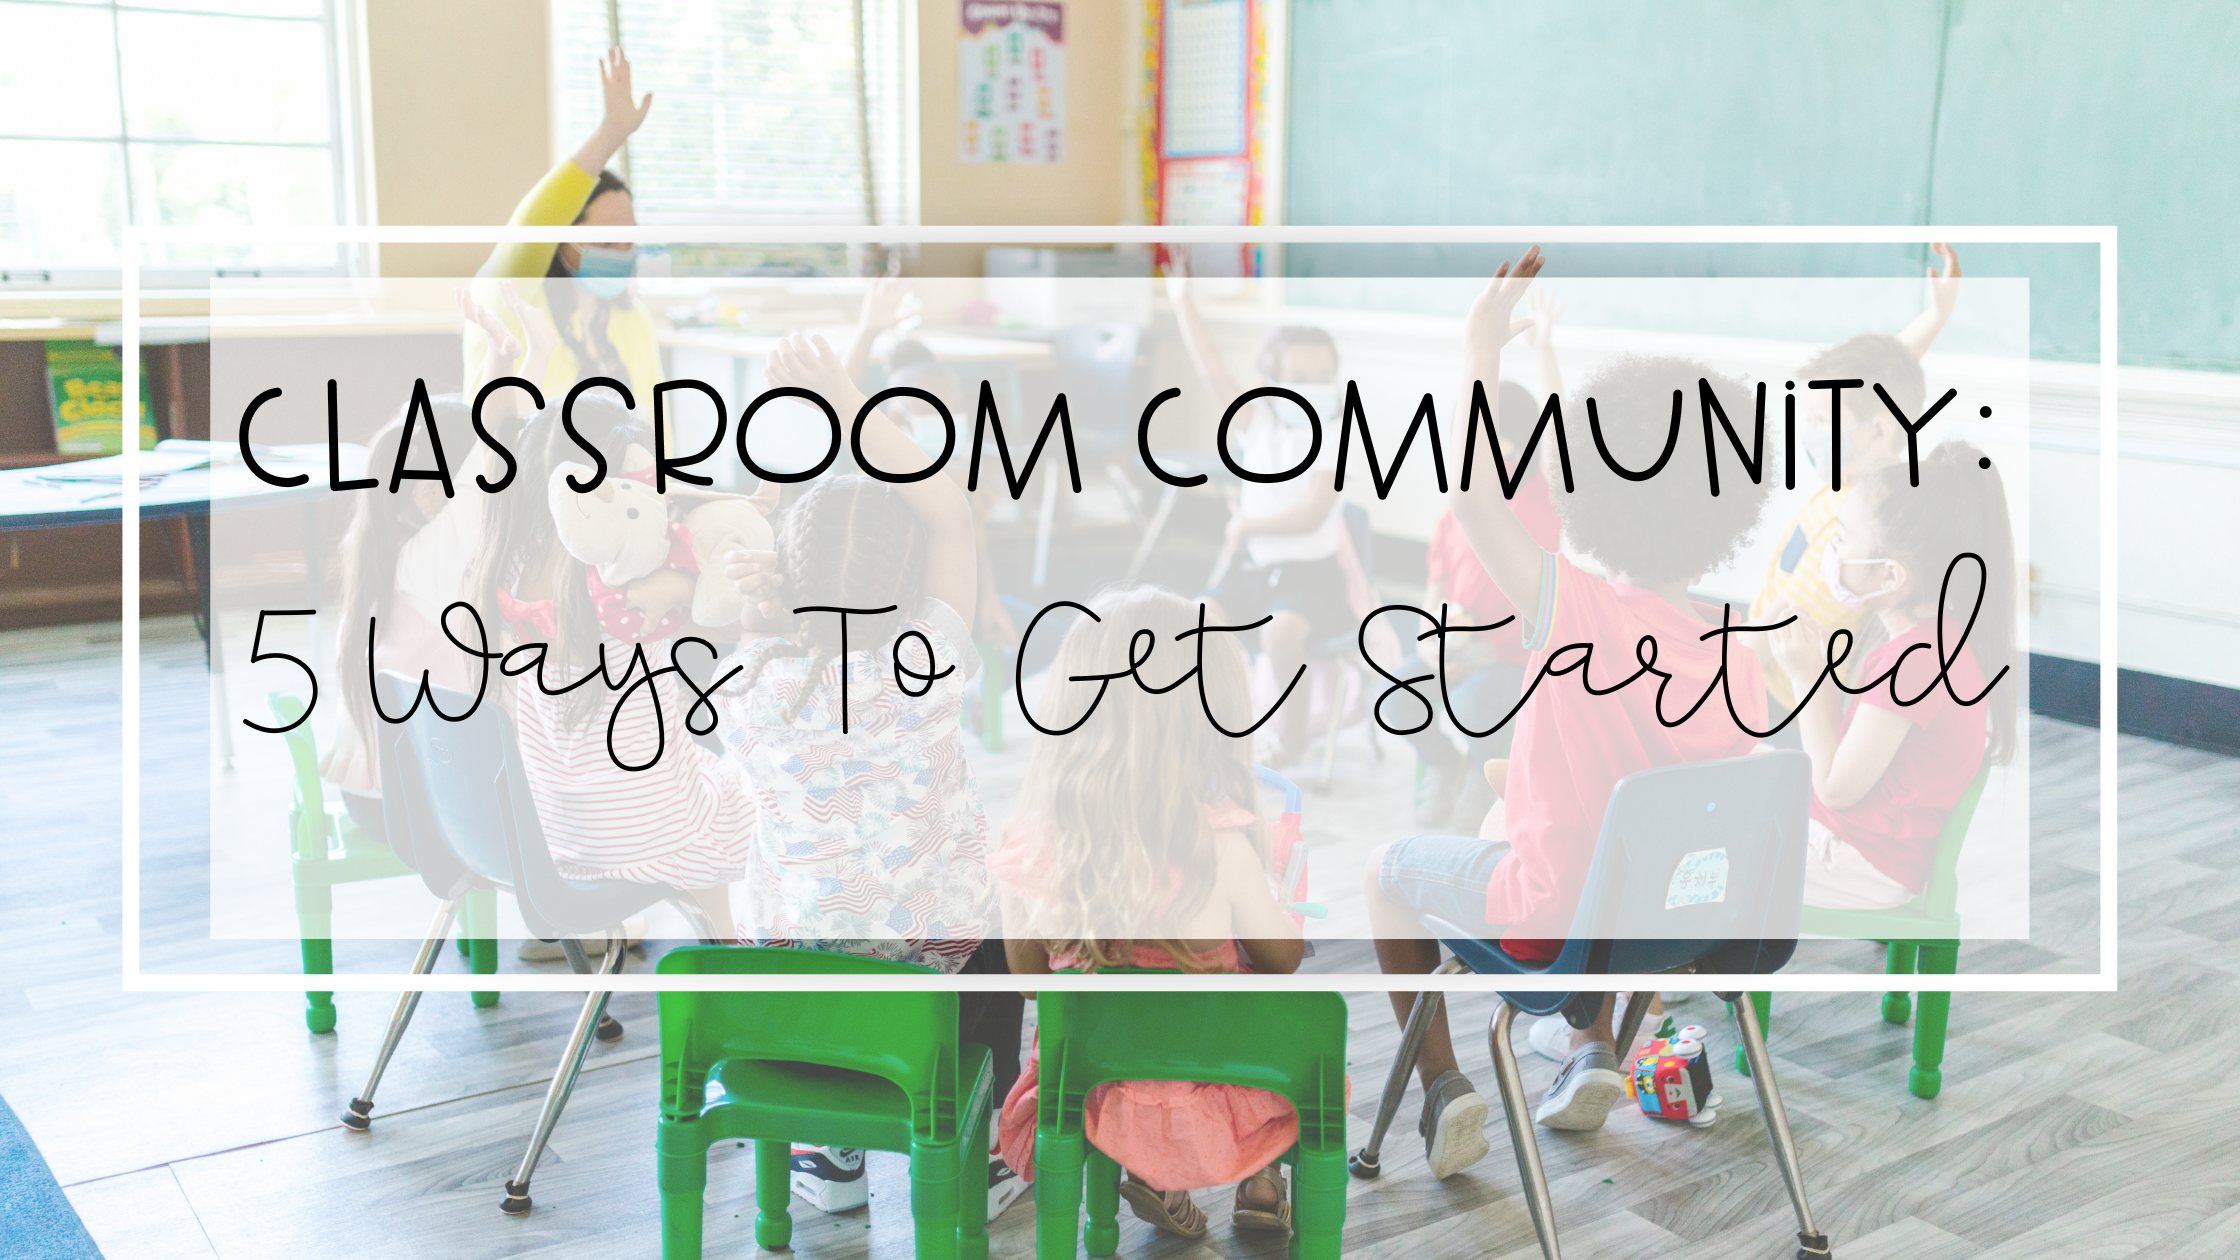 Building a Strong and Caring Classroom Community: Strategies for Teachers